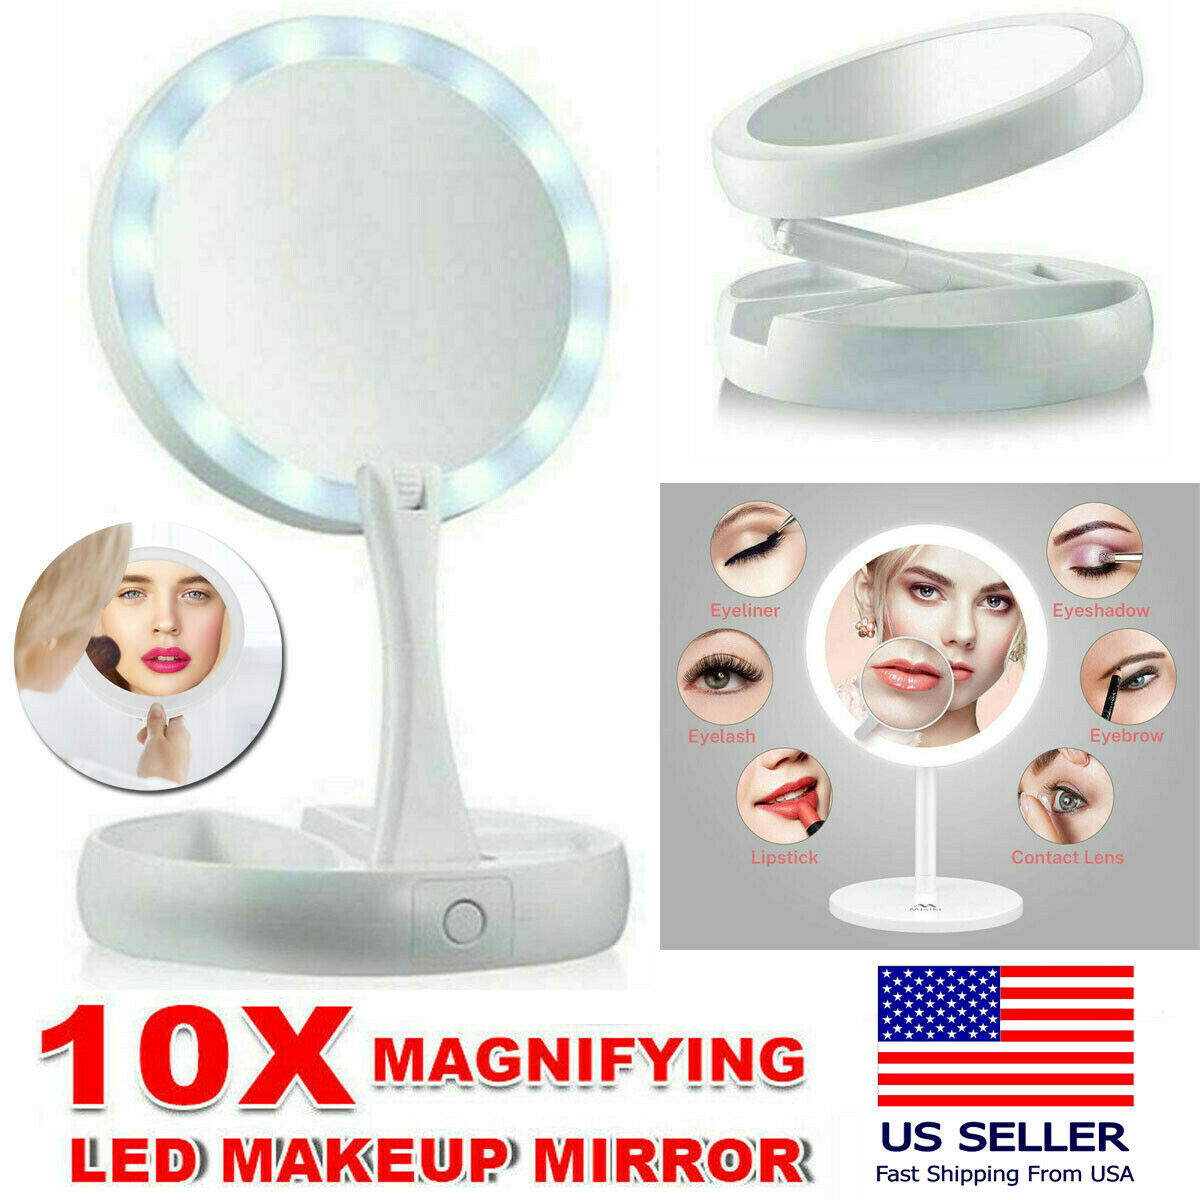 Makeup Mirror Led Light Up Double Side Folding 10x Magnifying Tabletop Portable